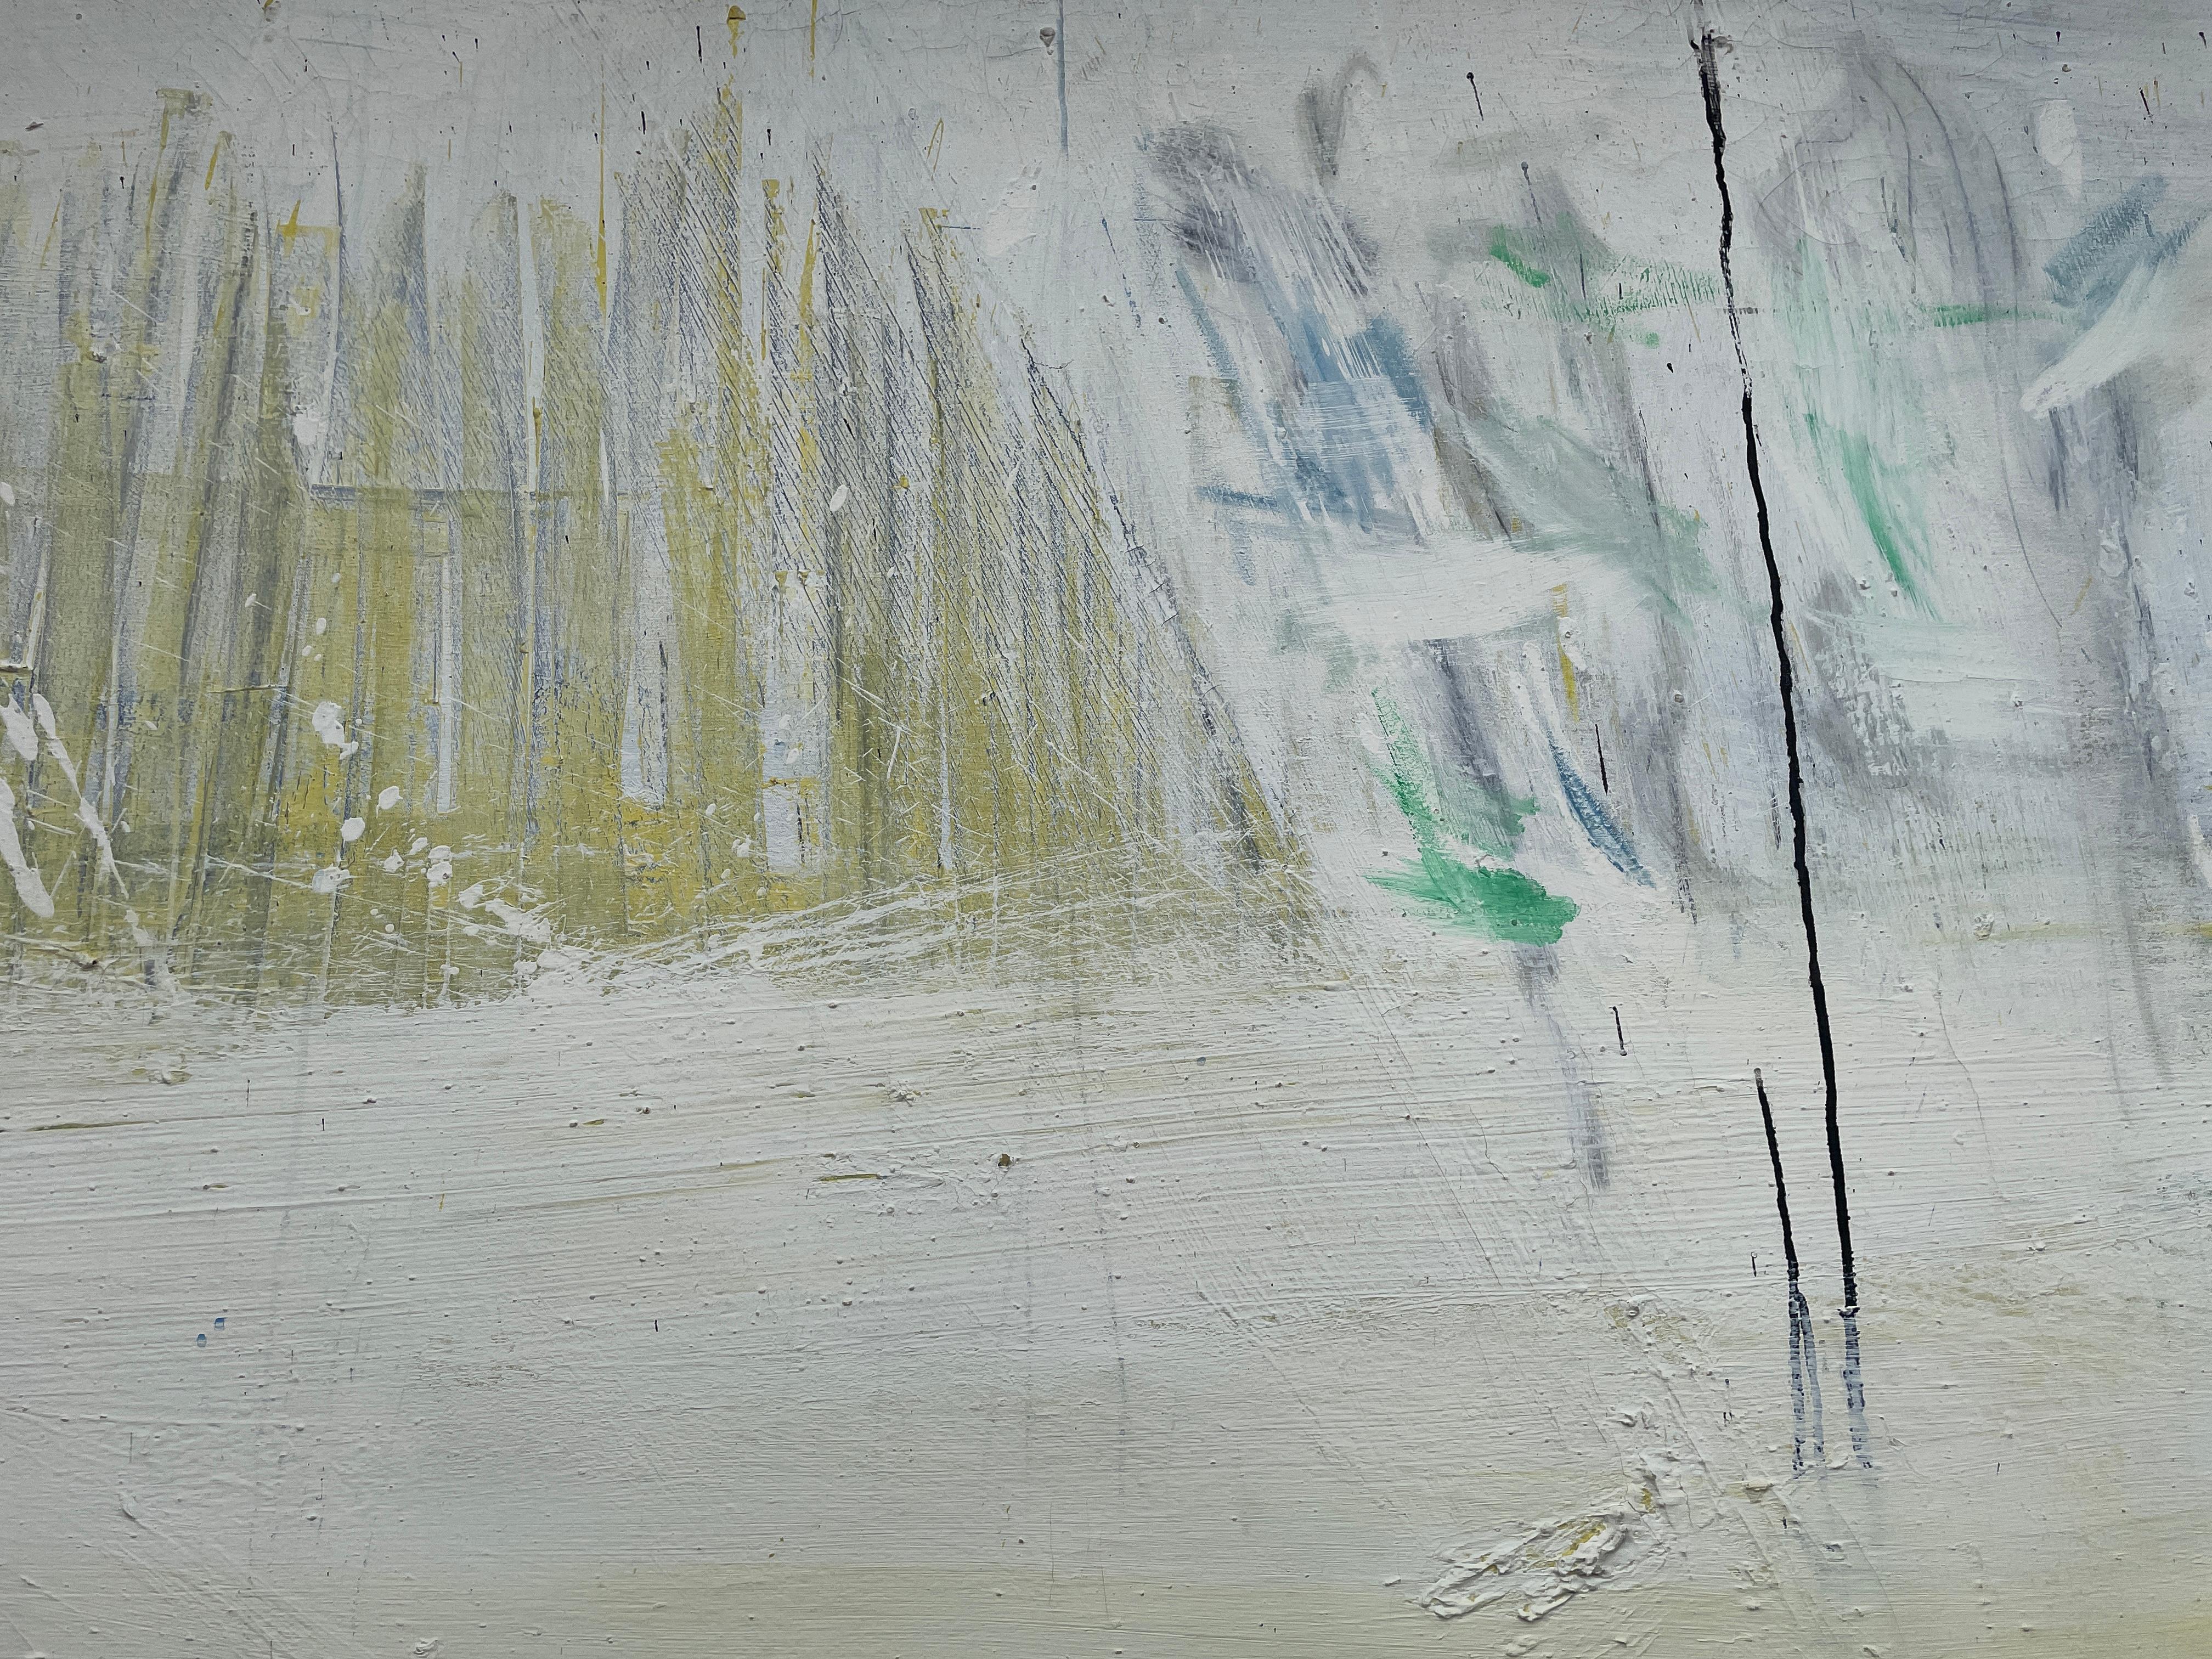 Alan Fenton (1927 - 2000)
Untitled, 1958-1960
Oil on canvas
90 x 84 inches

Fenton's quiet and contemplative nonobjective paintings and drawings were widely recognized for their demanding yet understated means of revealing a serious and sober